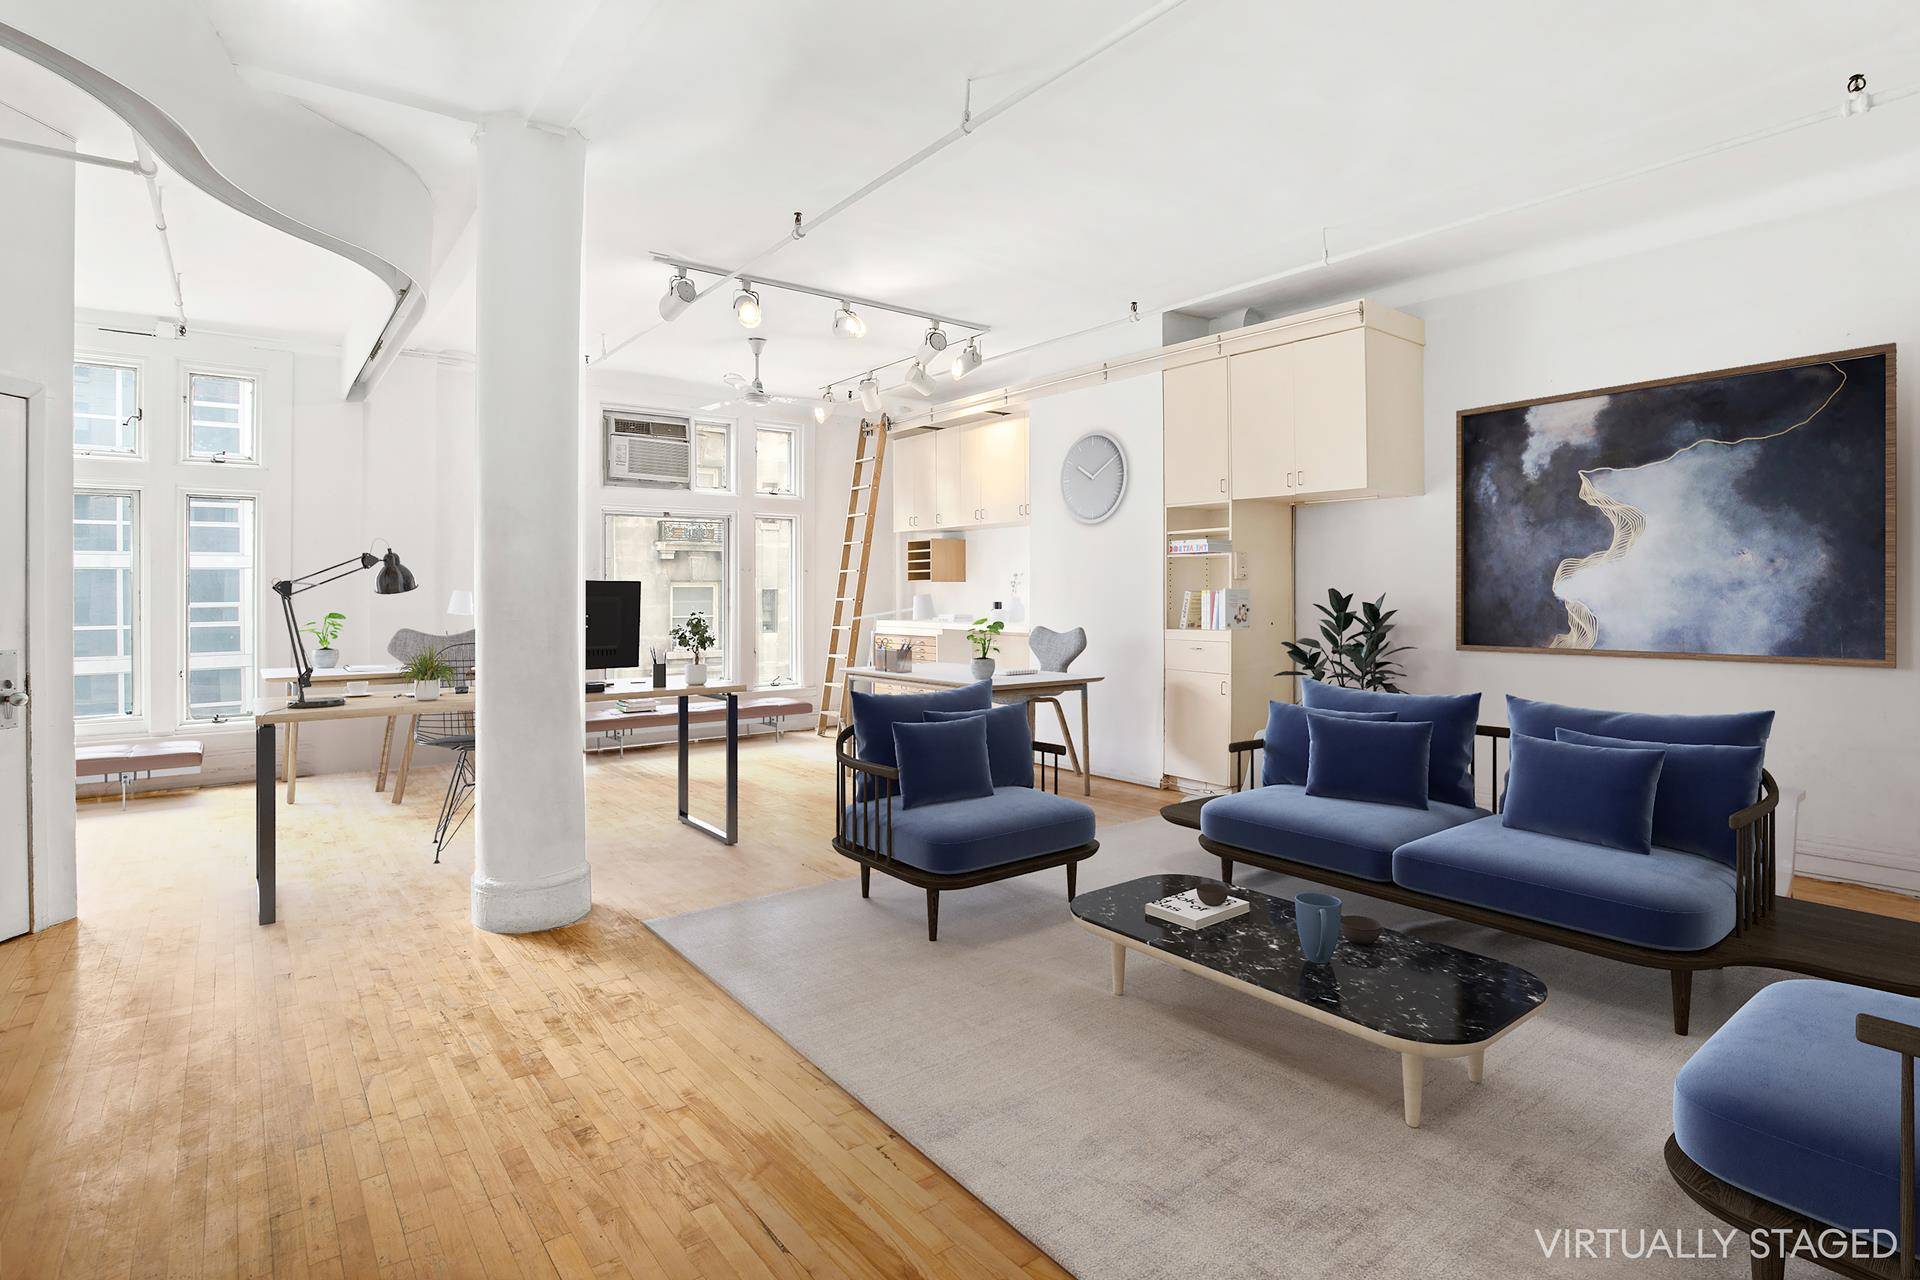 REDUCED PRICE 2, 450, 000 800 PER SQ FTRarely available 3, 000 square foot LEGAL LIVE WORK LOFT in a handsome boutique prewar building, located at 31 WEST 31st ST.